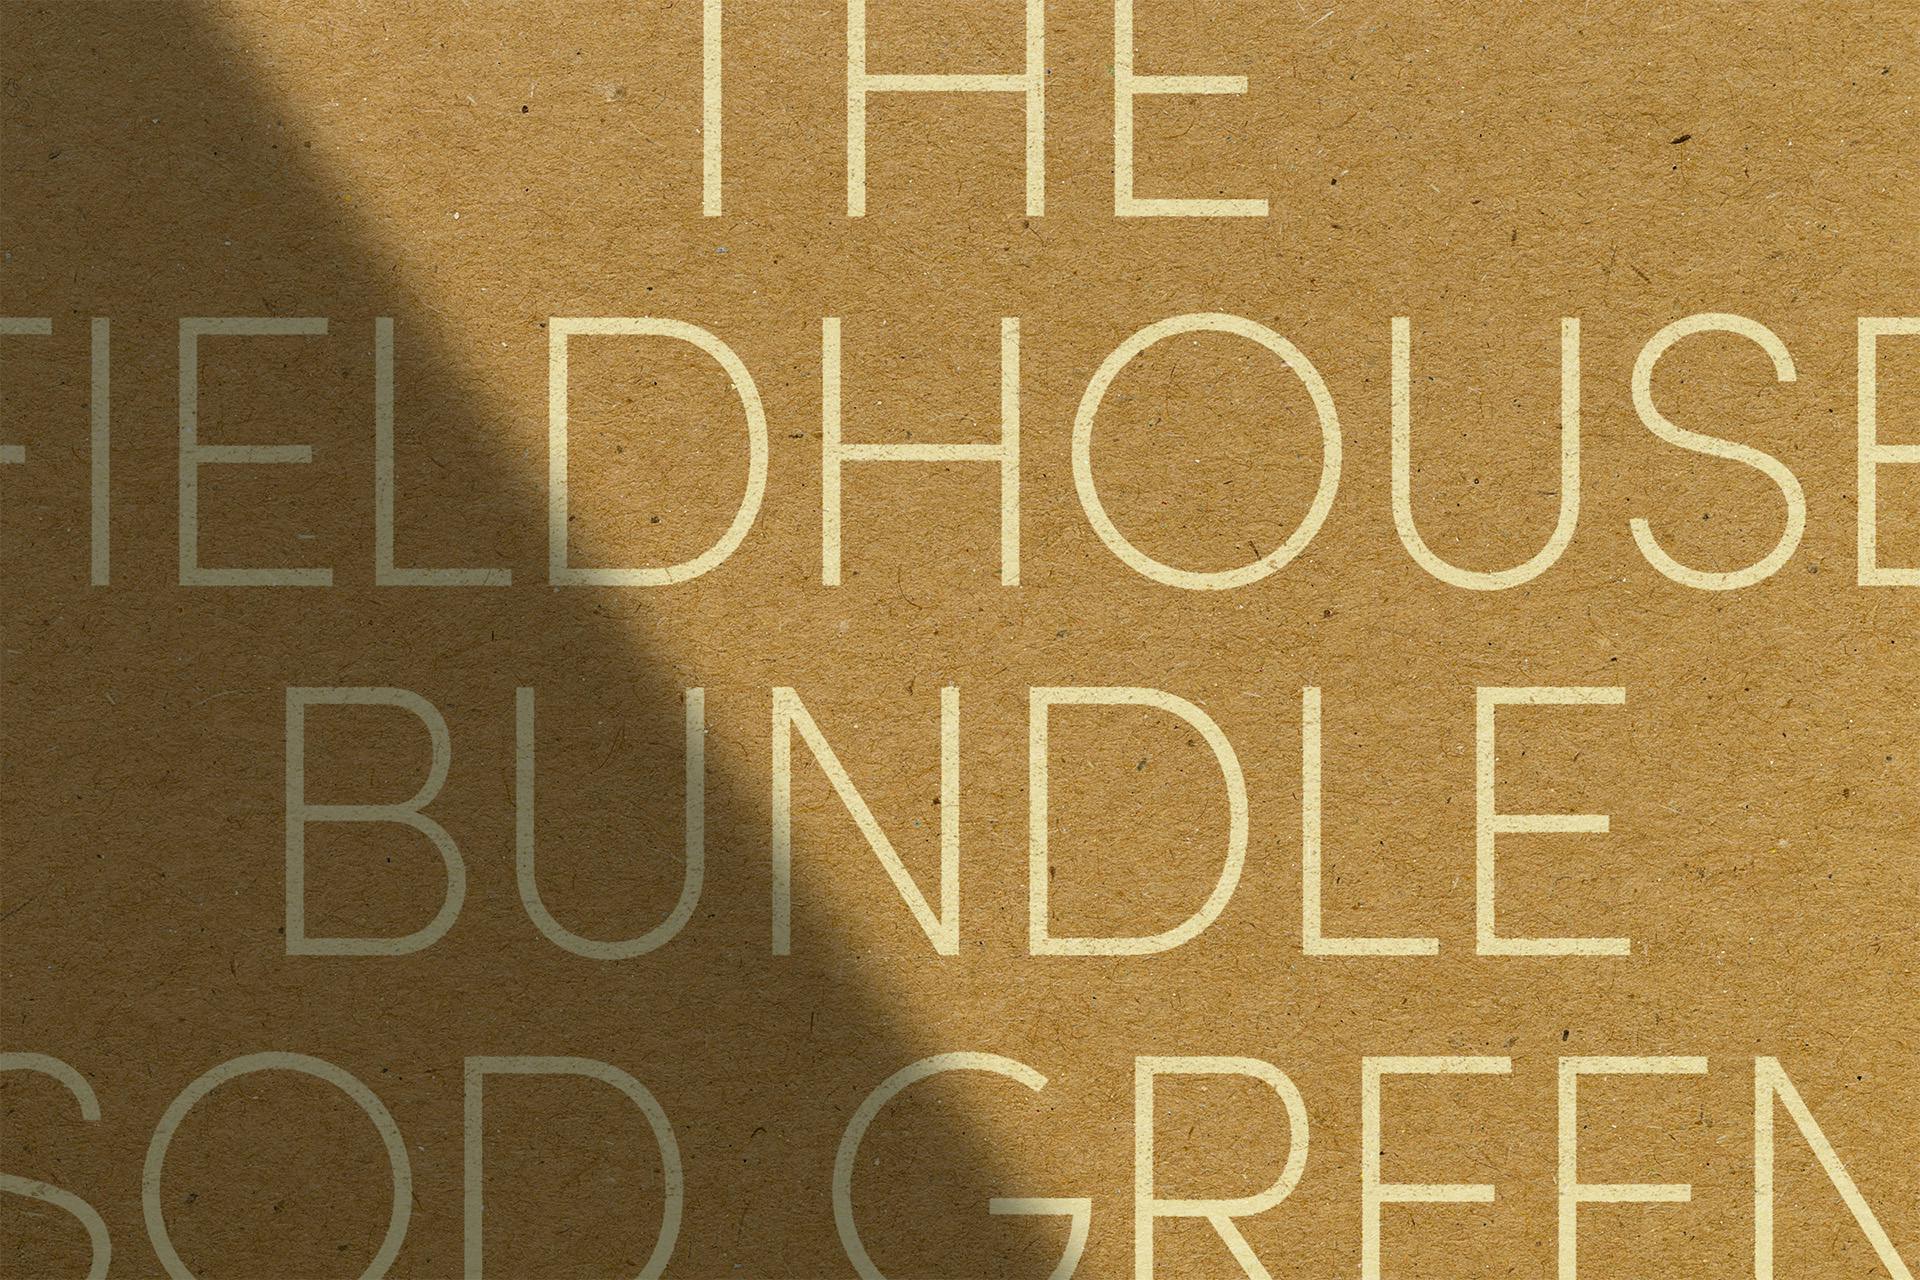 Image showing the branding for Leath, as seen on a brown background with the words 'The fieldhouse bundle green'